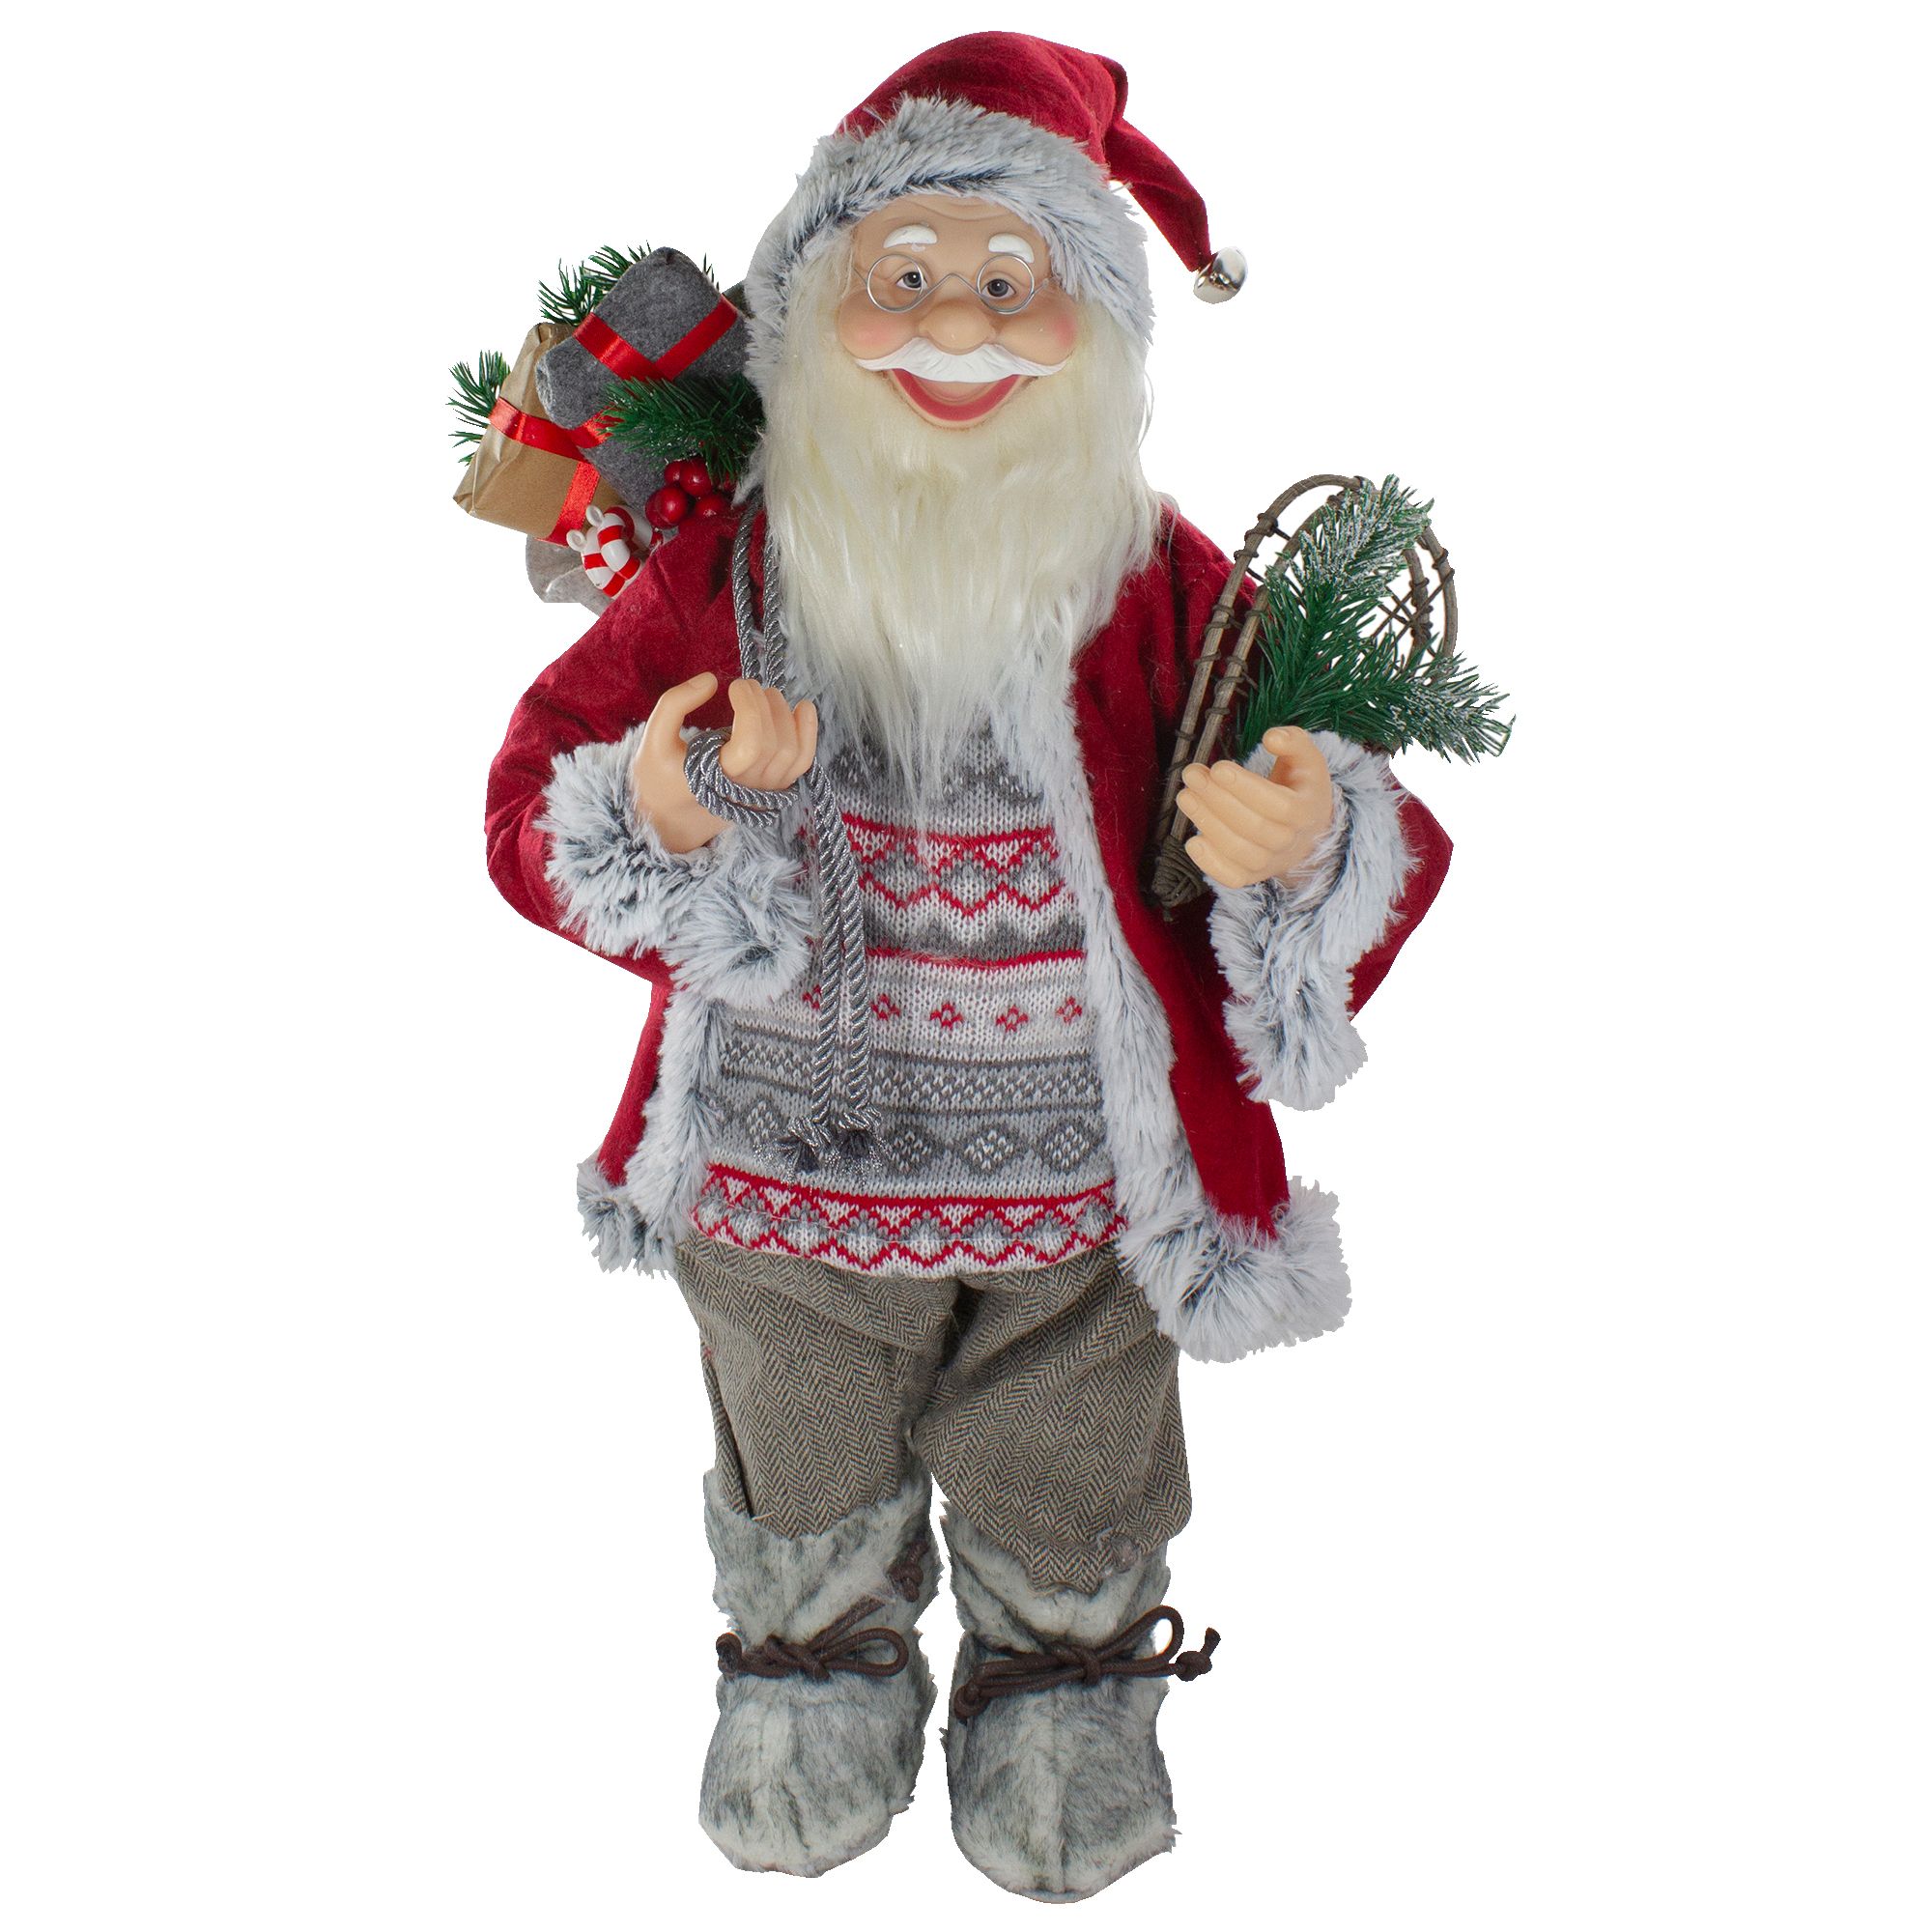 Northlight 2' Standing Santa Christmas Figure Carrying Snow Shoes and Presents